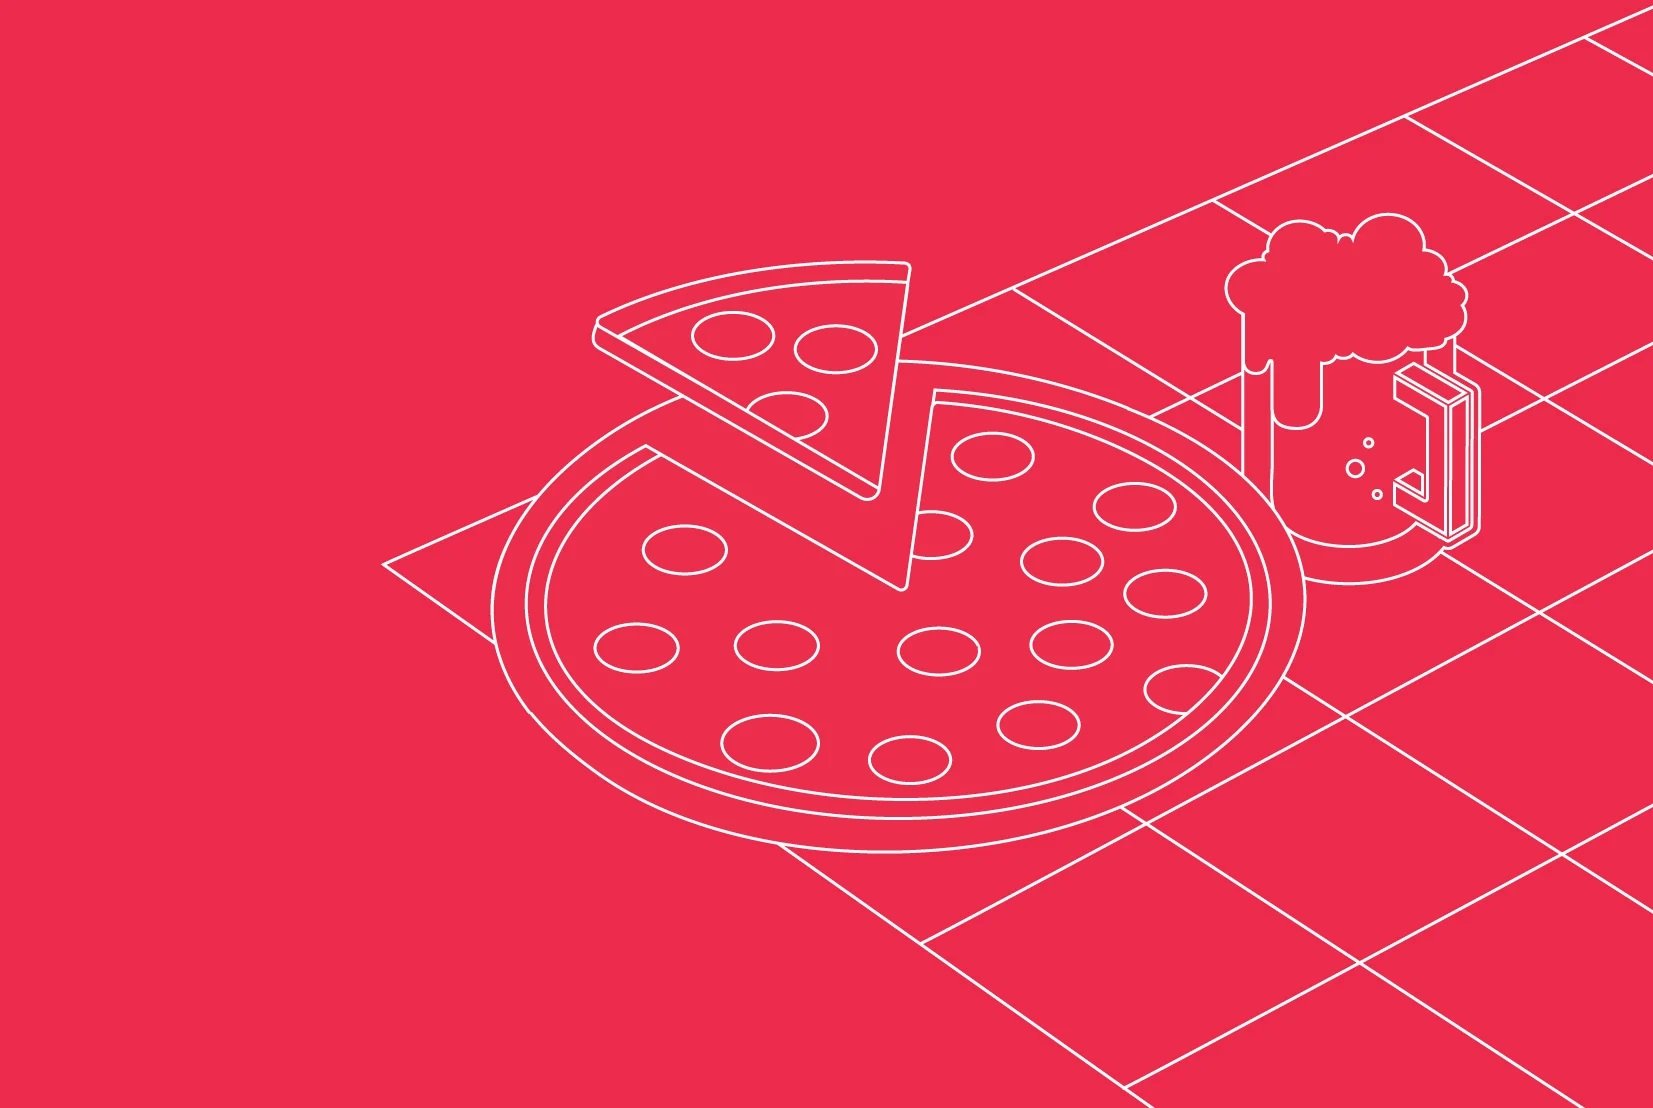 Join us for a Pizza Party @ Money 20/20 with Nova Credit 